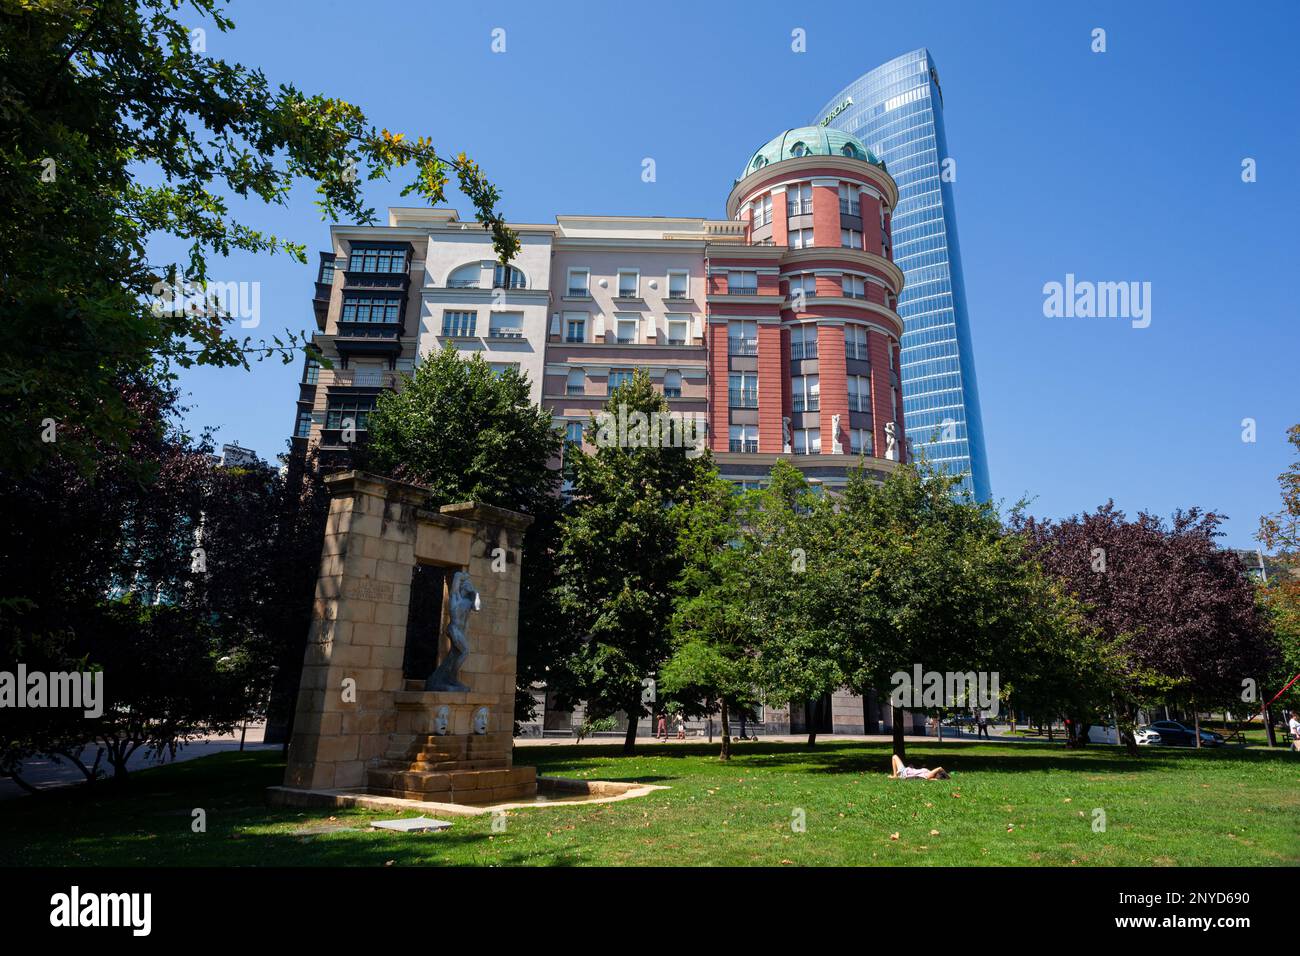 Bilbao, Spain - August 02, 2022: Old and moderm Architecture in the Doña Casilda Iturrizar Park, Bilbao Stock Photo